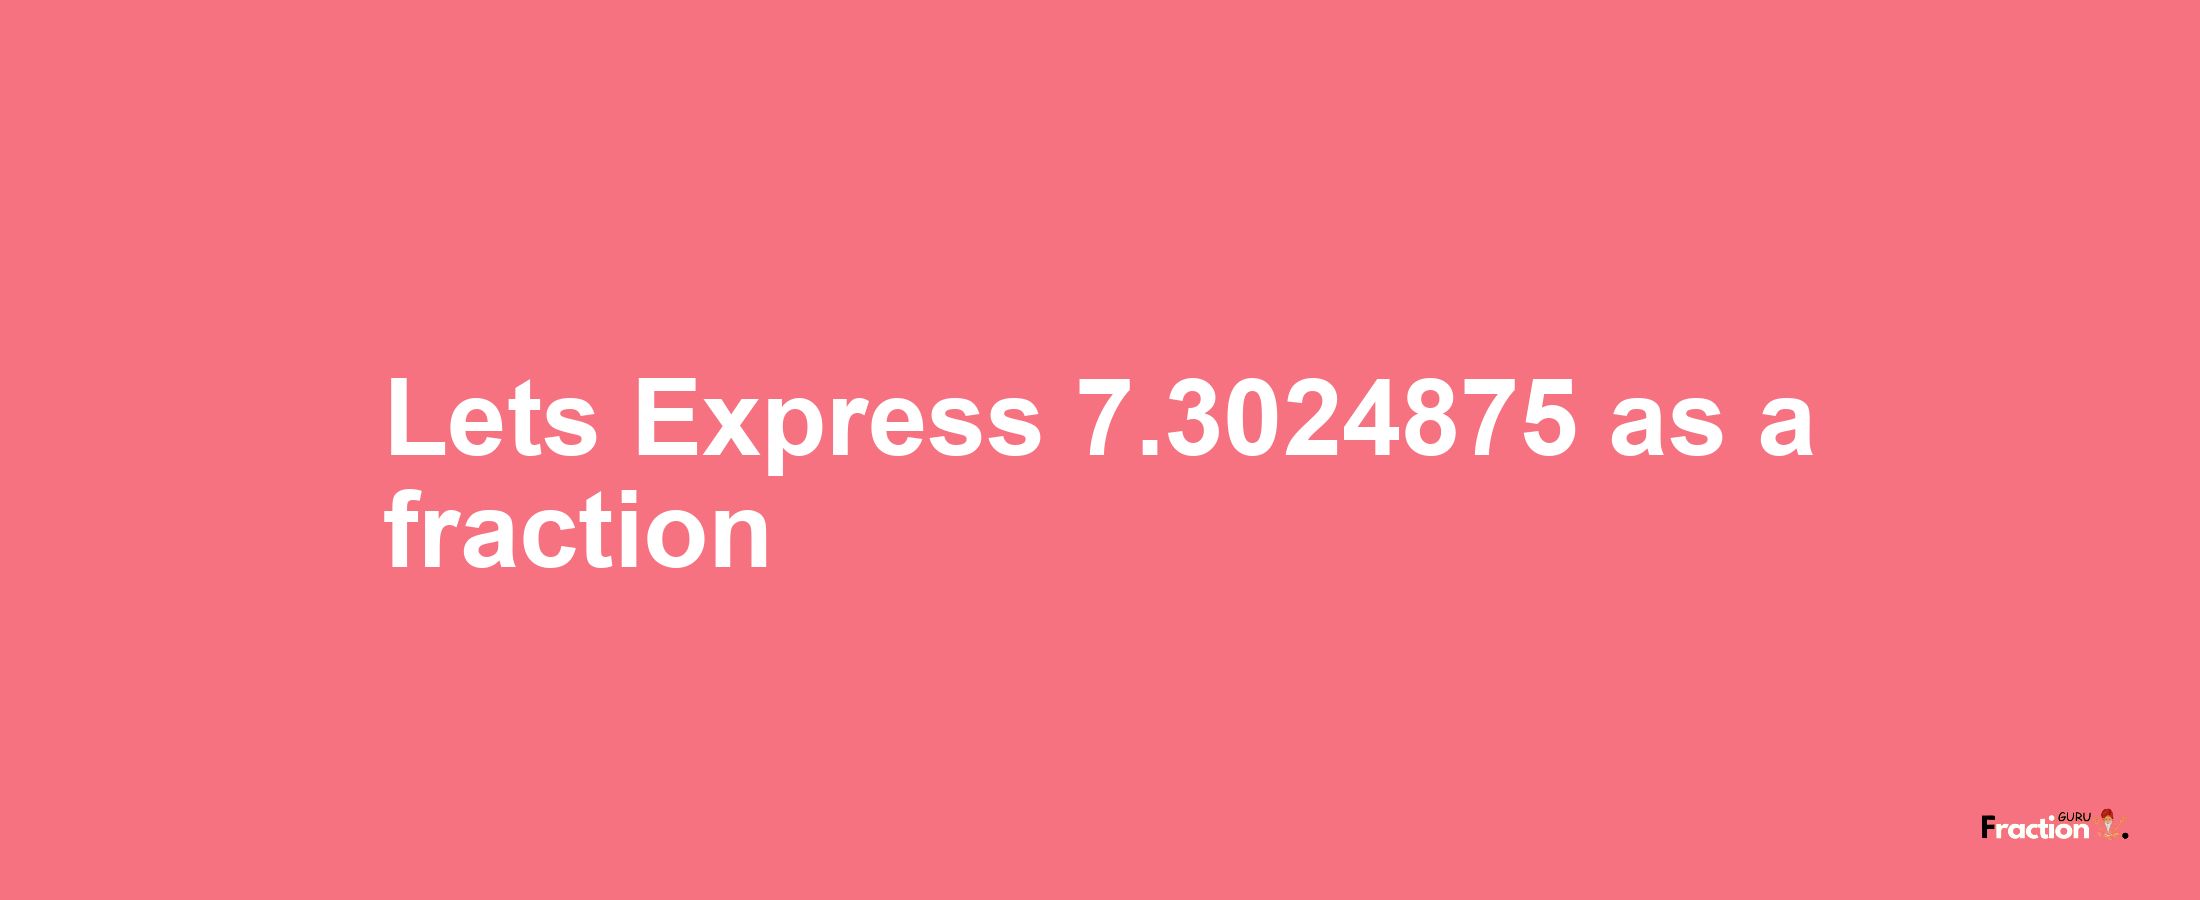 Lets Express 7.3024875 as afraction